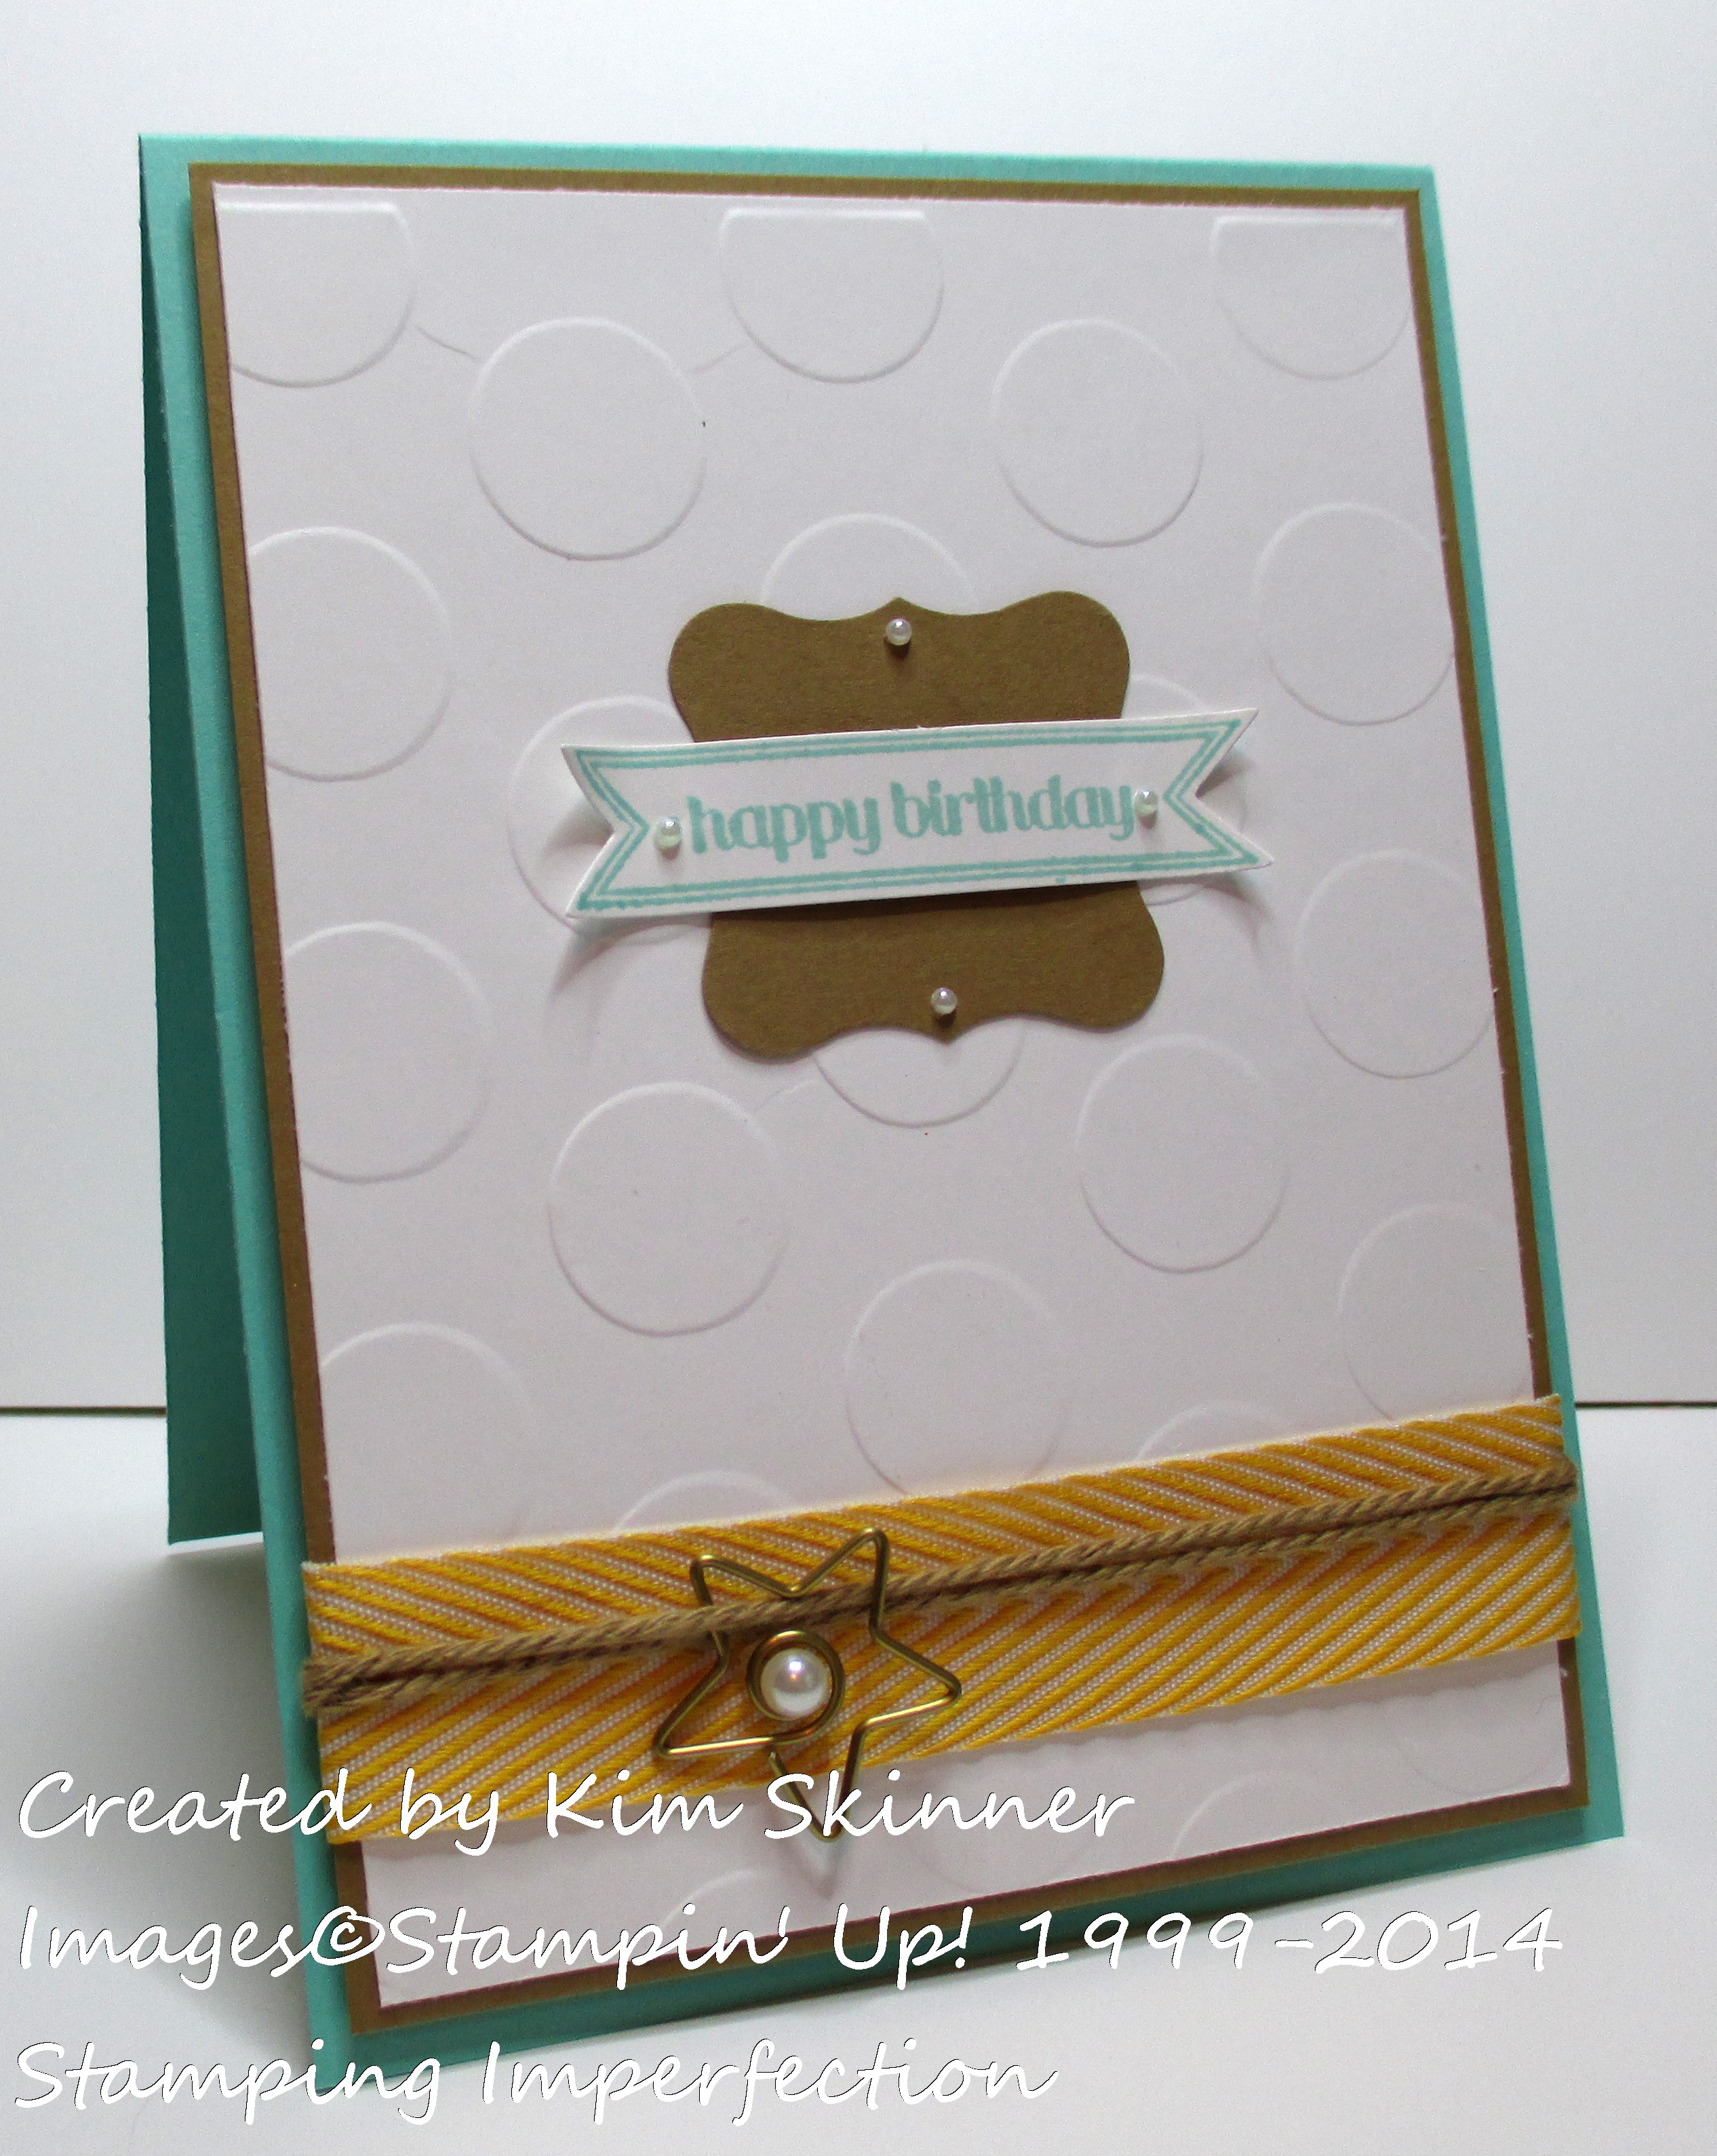 Stamping Imperfection create outside my comfort zone: Curly Label Punch, Bitty Banner Framelits and chevron ribbon